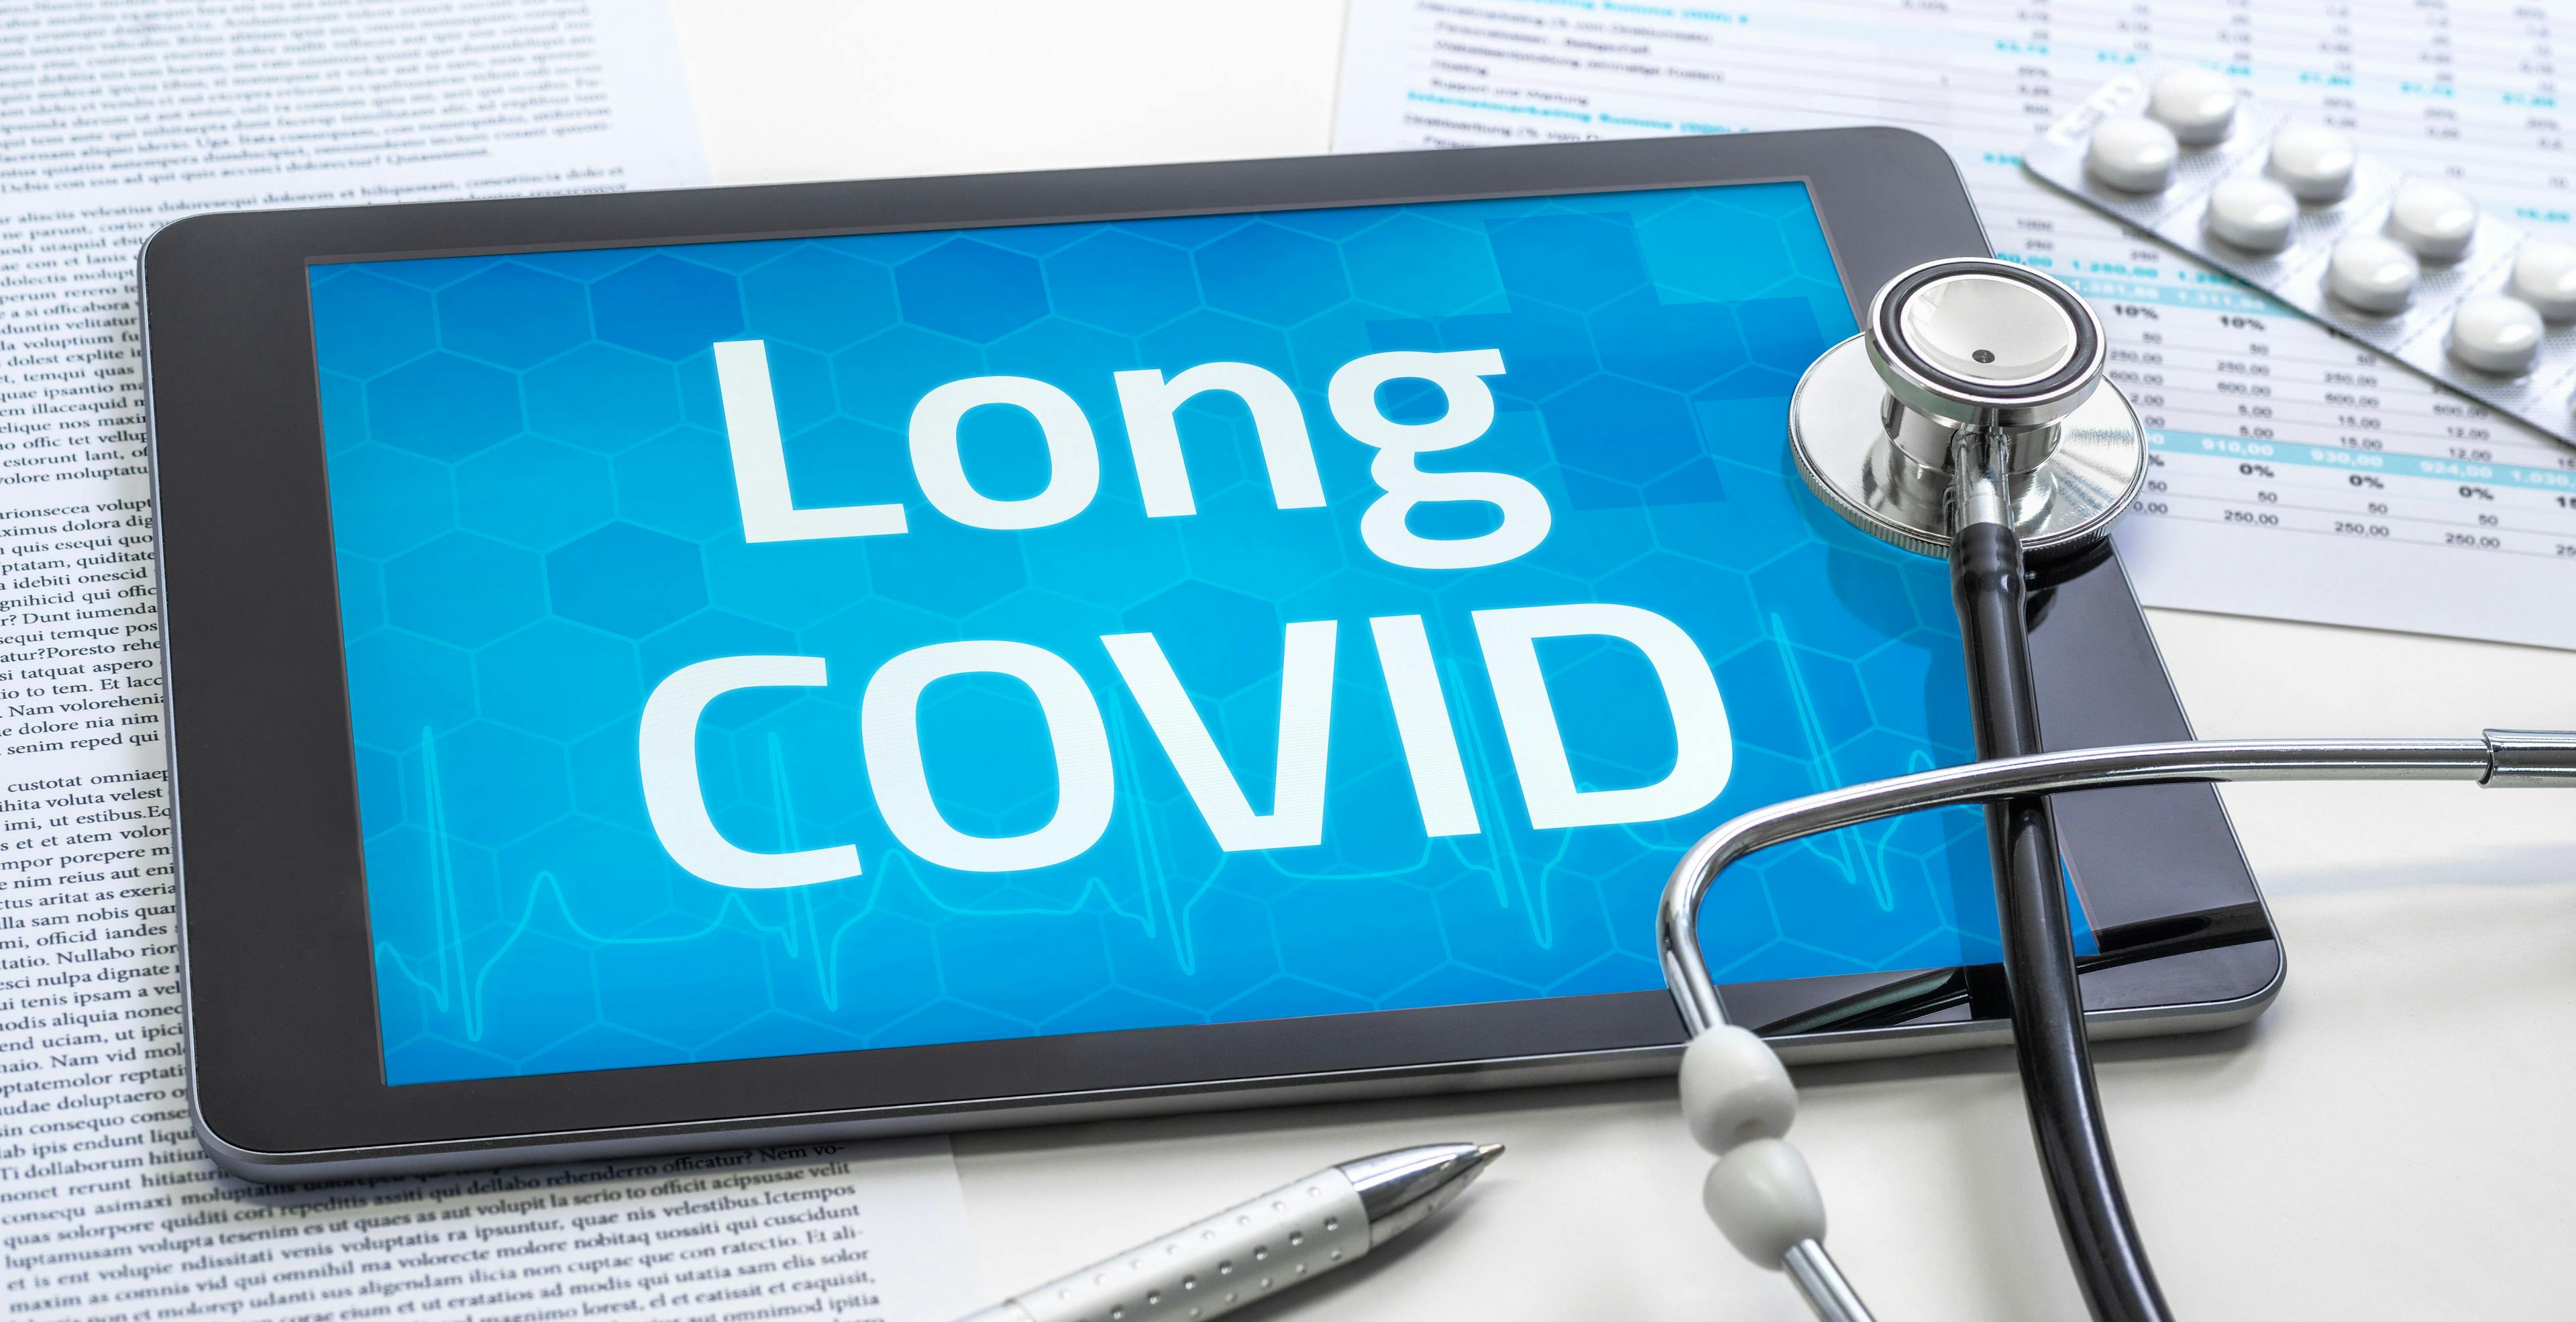 What factors contribute to post-COVID-19 conditions (“long COVID”)? Can vaccination before or after a COVID-19 infection decrease the risk of long COVID?